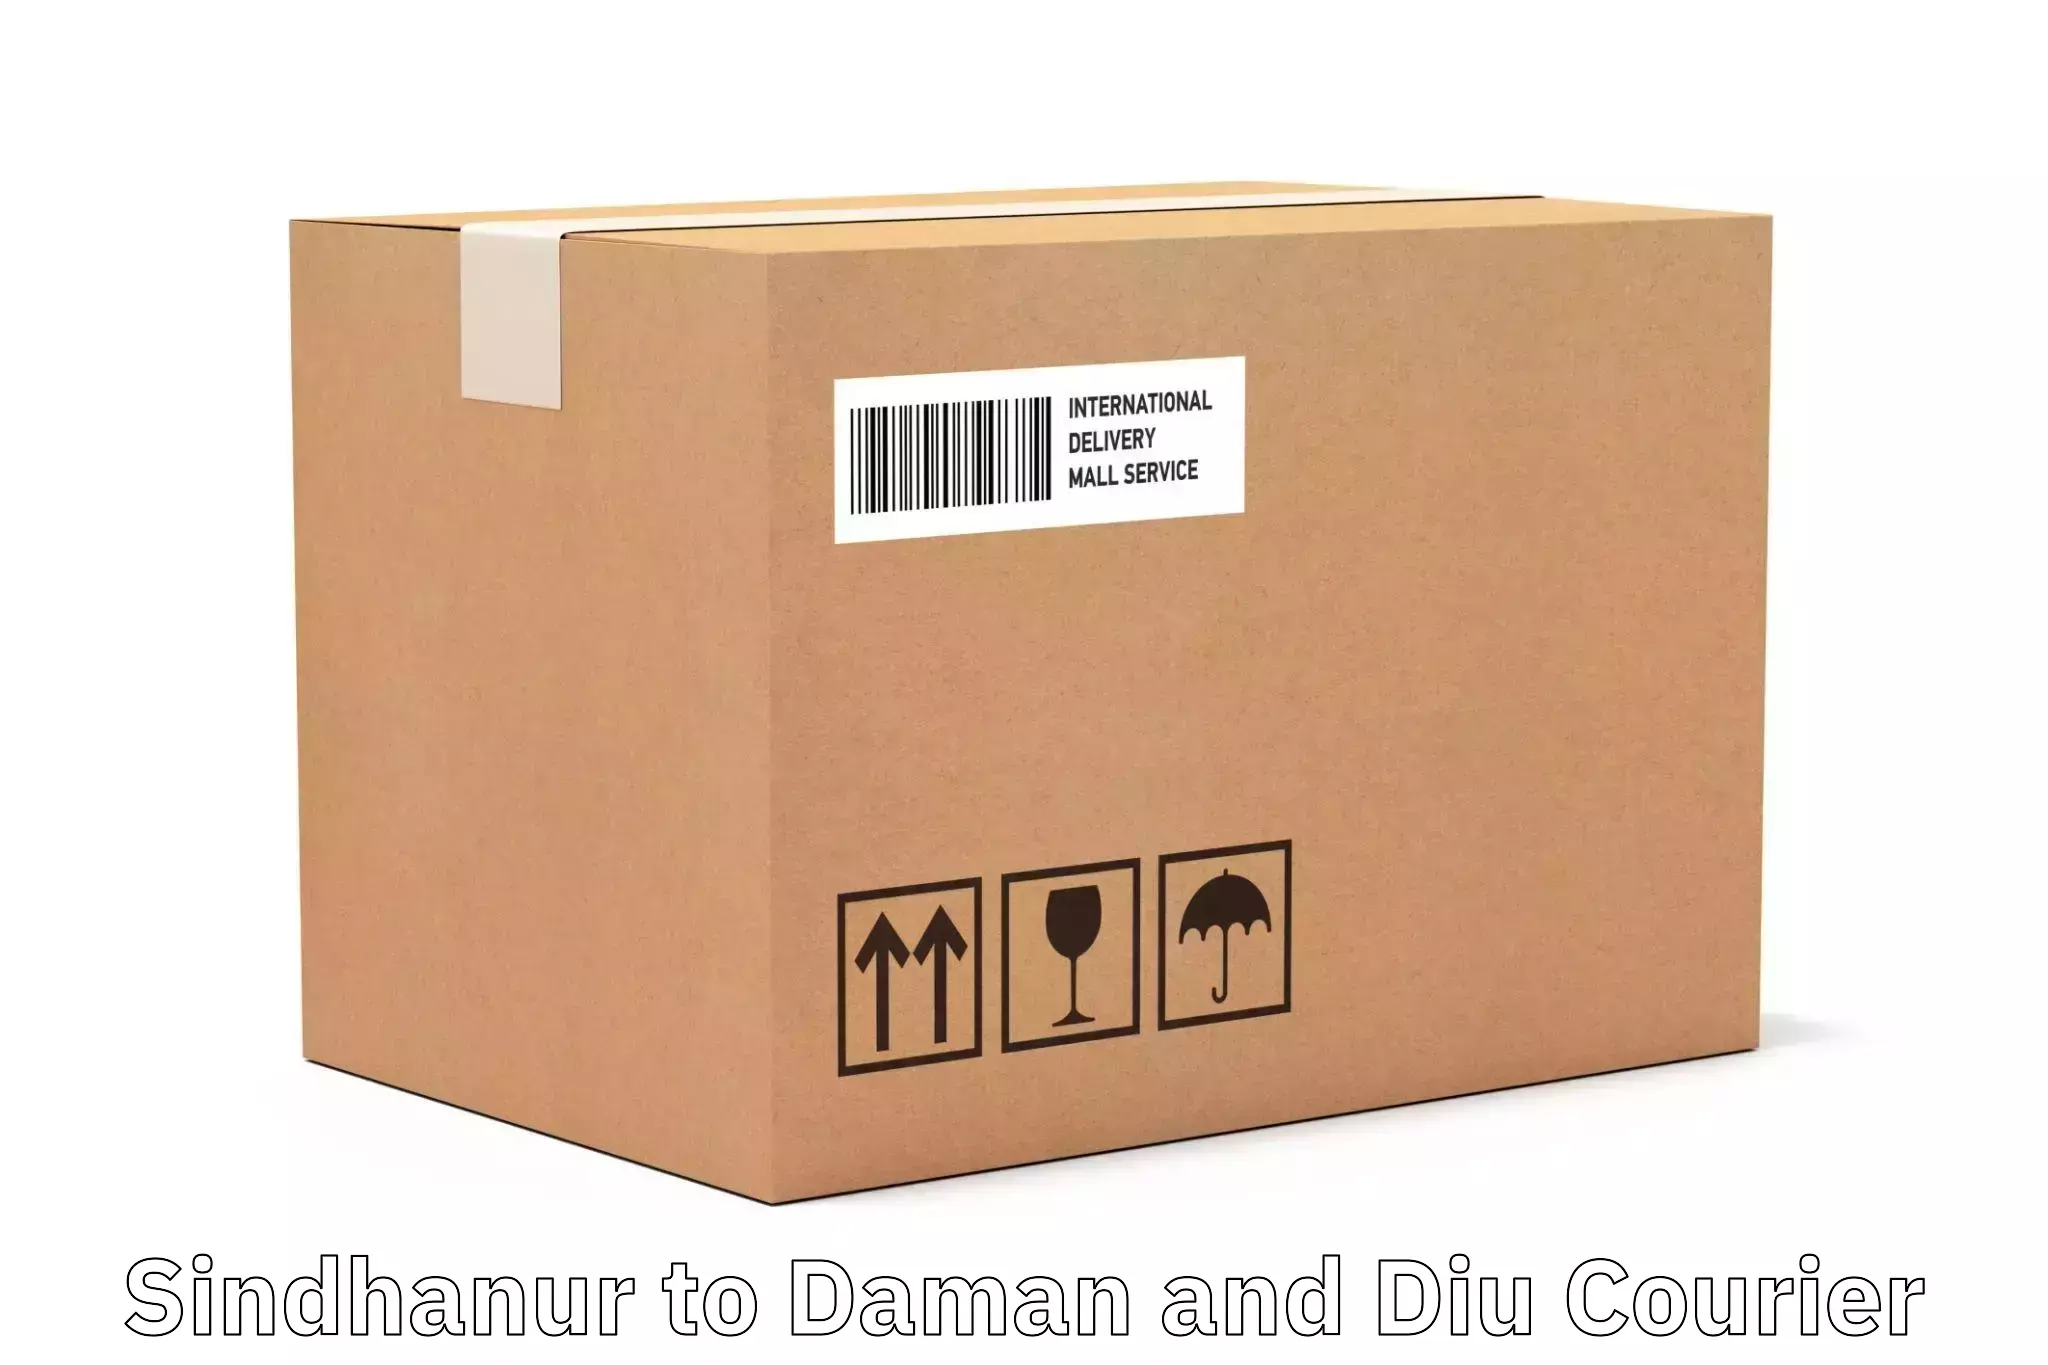 Courier service efficiency in Sindhanur to Daman and Diu